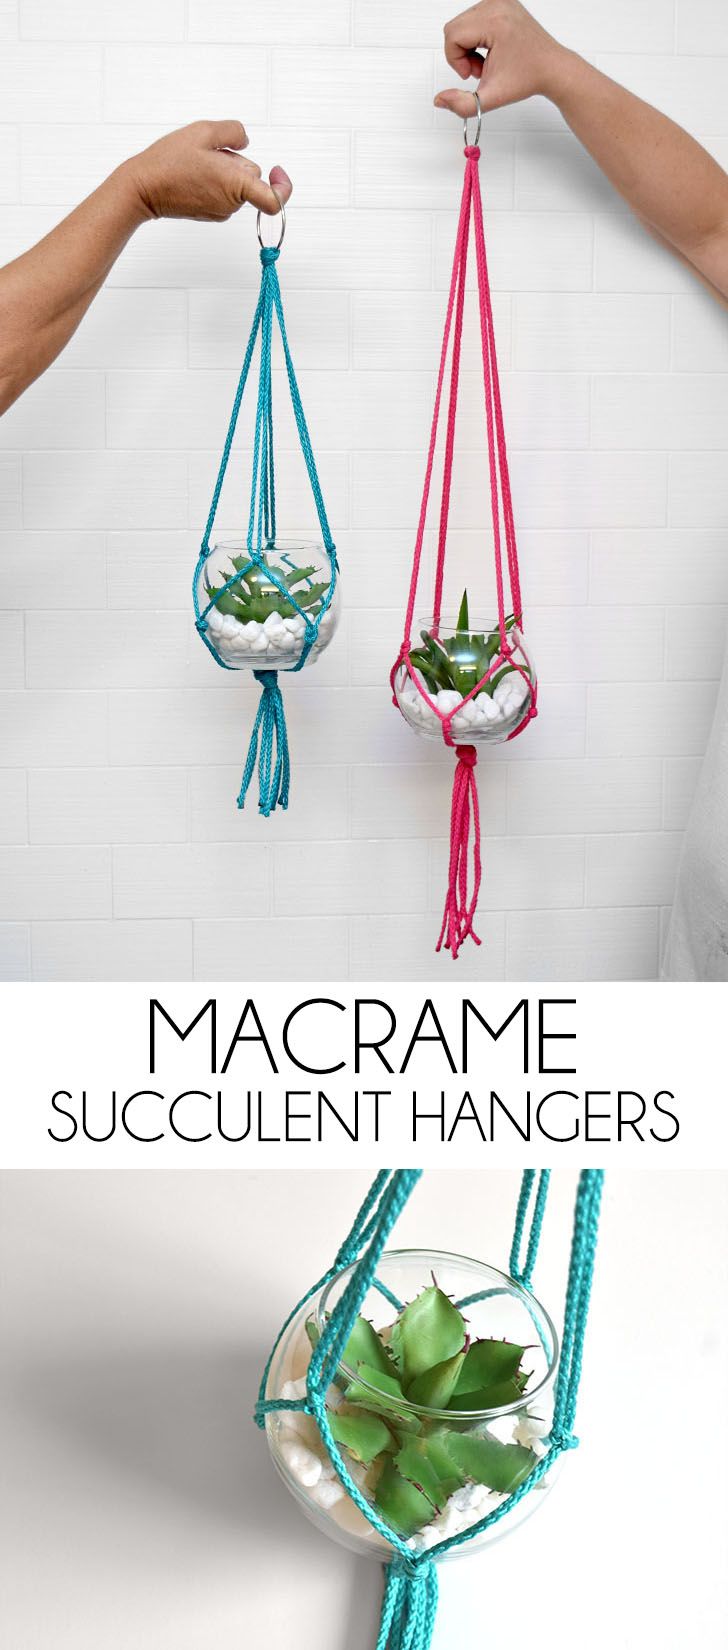 Macrame is so easy to do! Try it out with this simple succulent hanger!